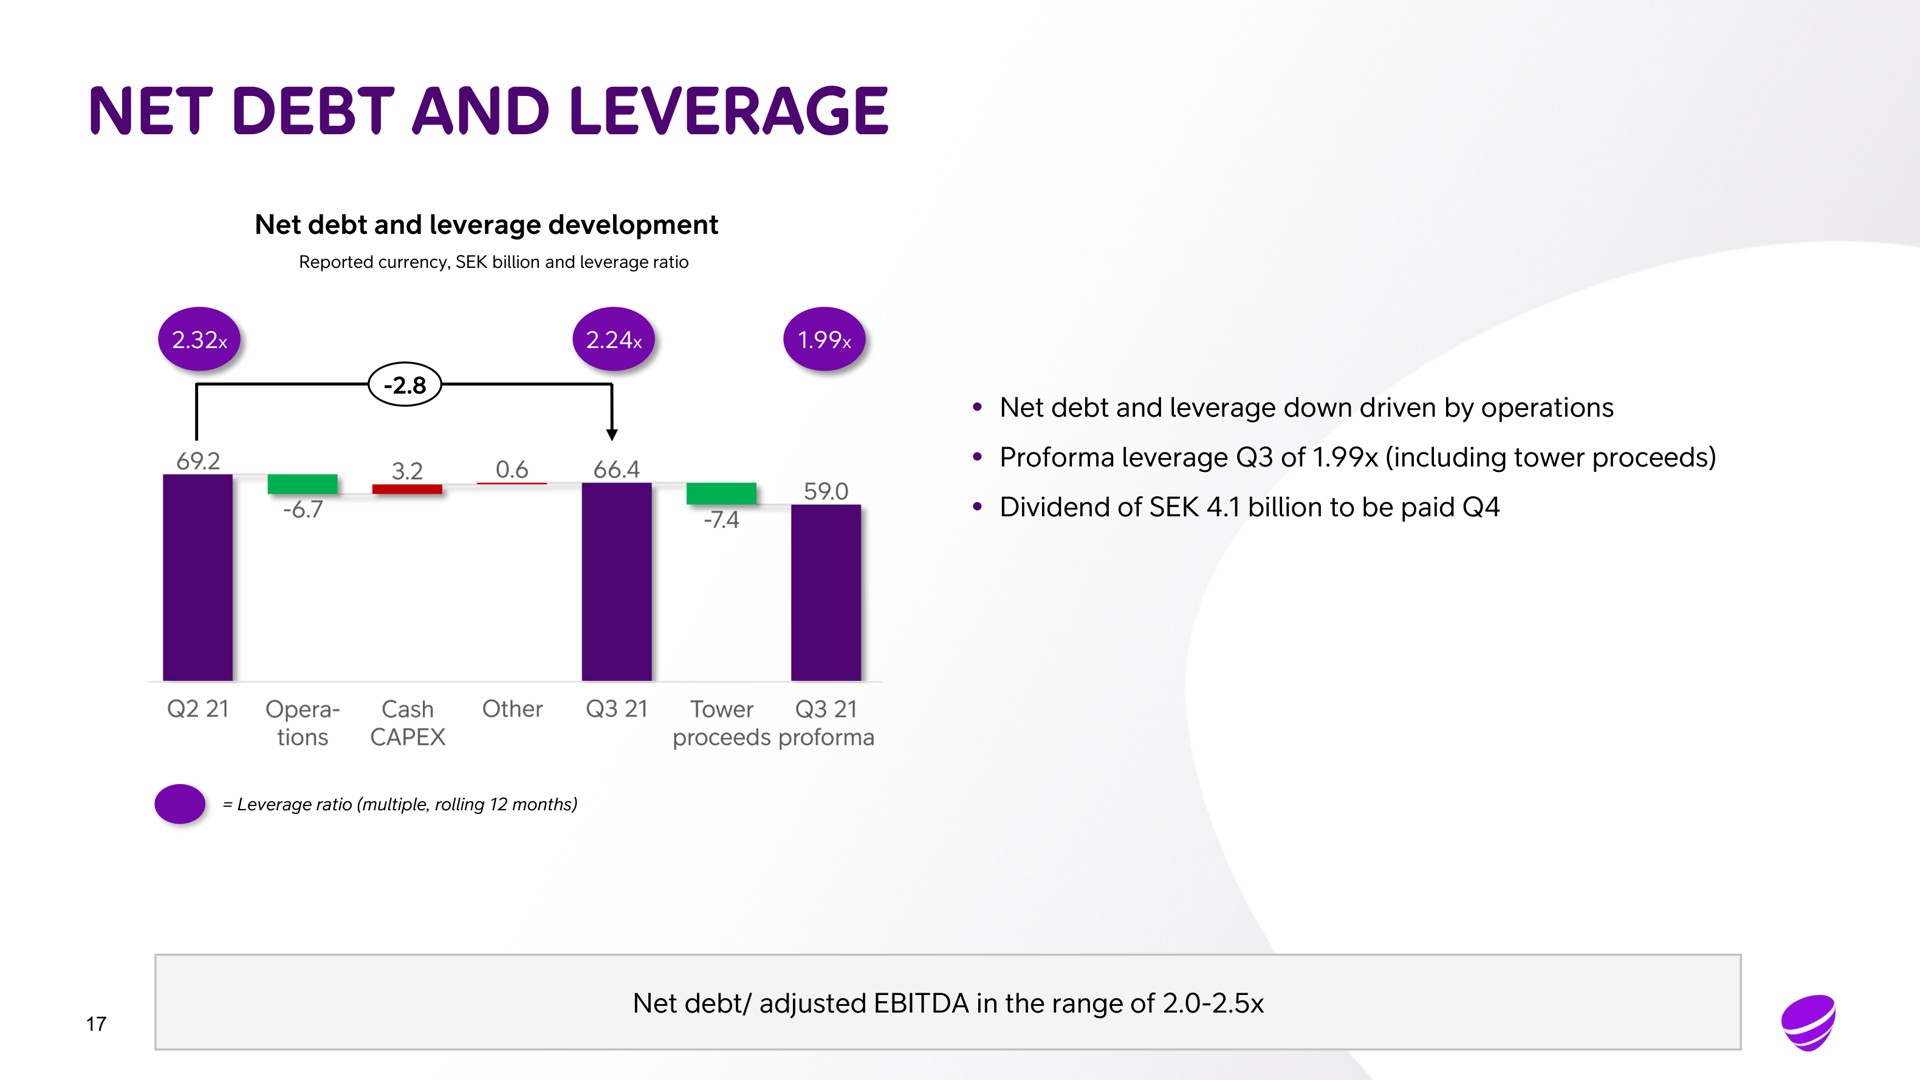 net debt and leverage net debt and leverage development net debt and leverage down driven by operations leverage of including tower proceeds dividend of billion to be paid net debt adjusted in the range of | Telia Company